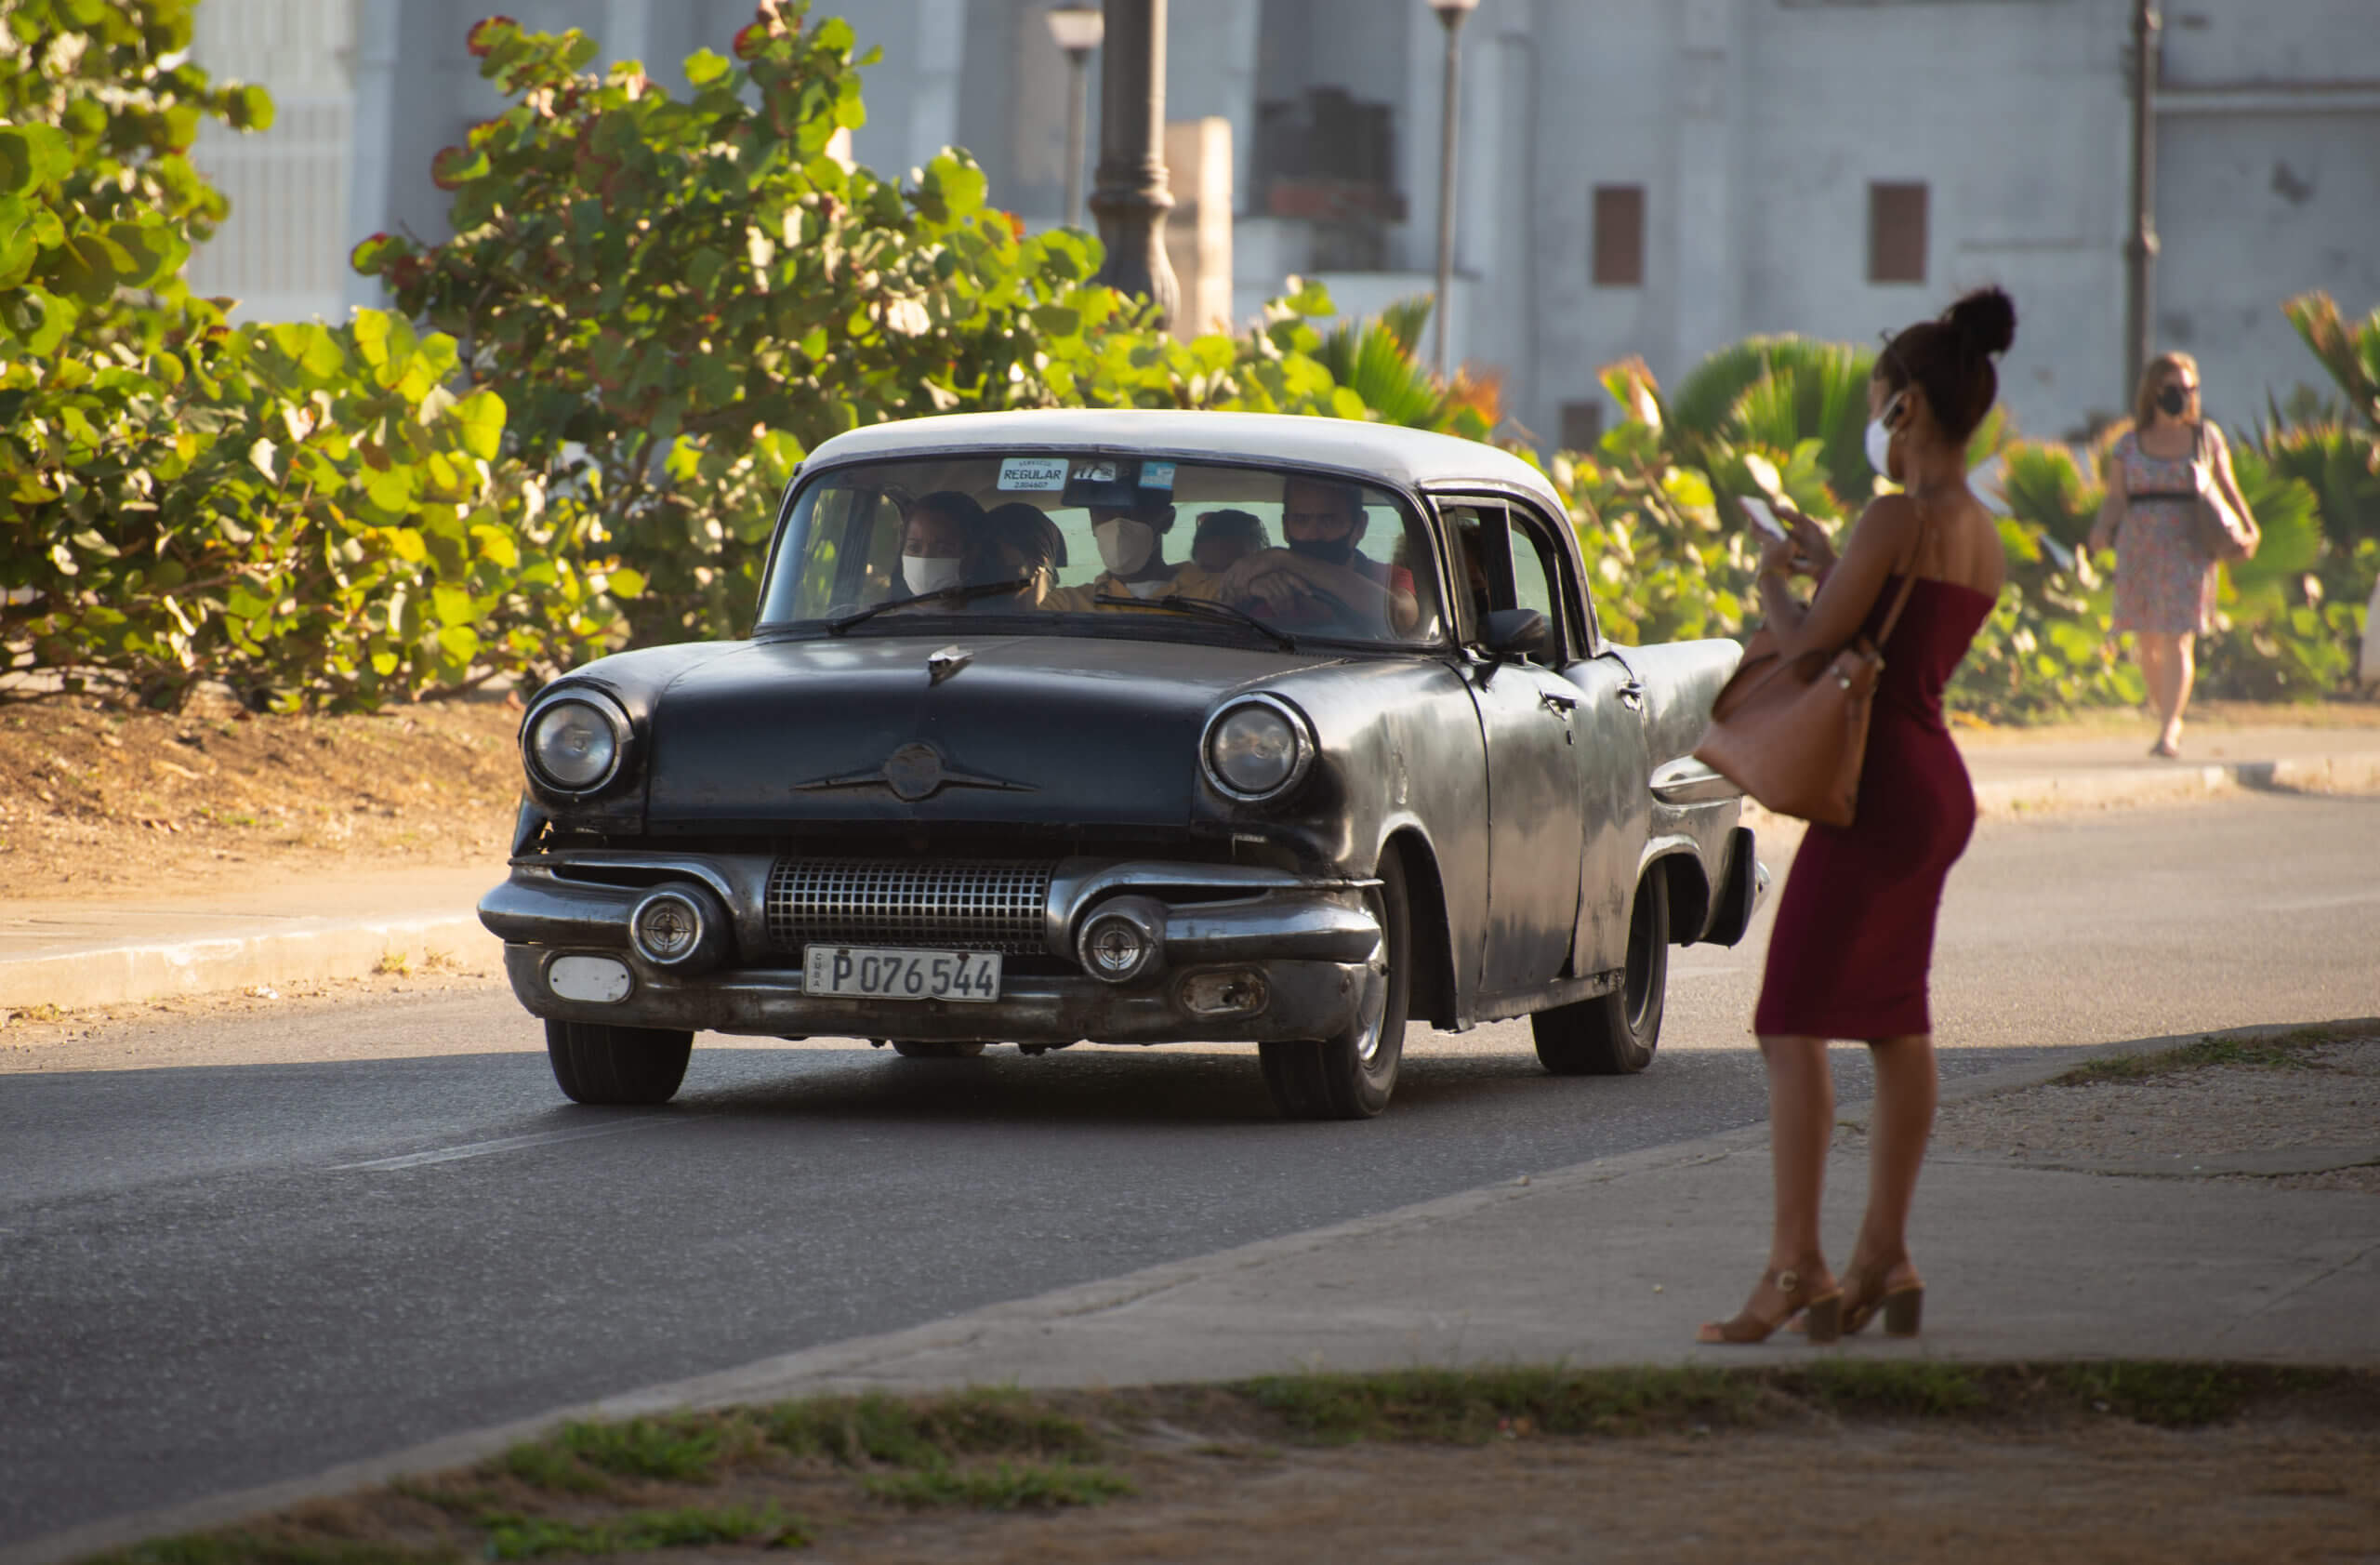 A woman waits to cross a busy street in the Habana Centro district. © 2022 John D. Elliott • www.TheHumanPulse.com